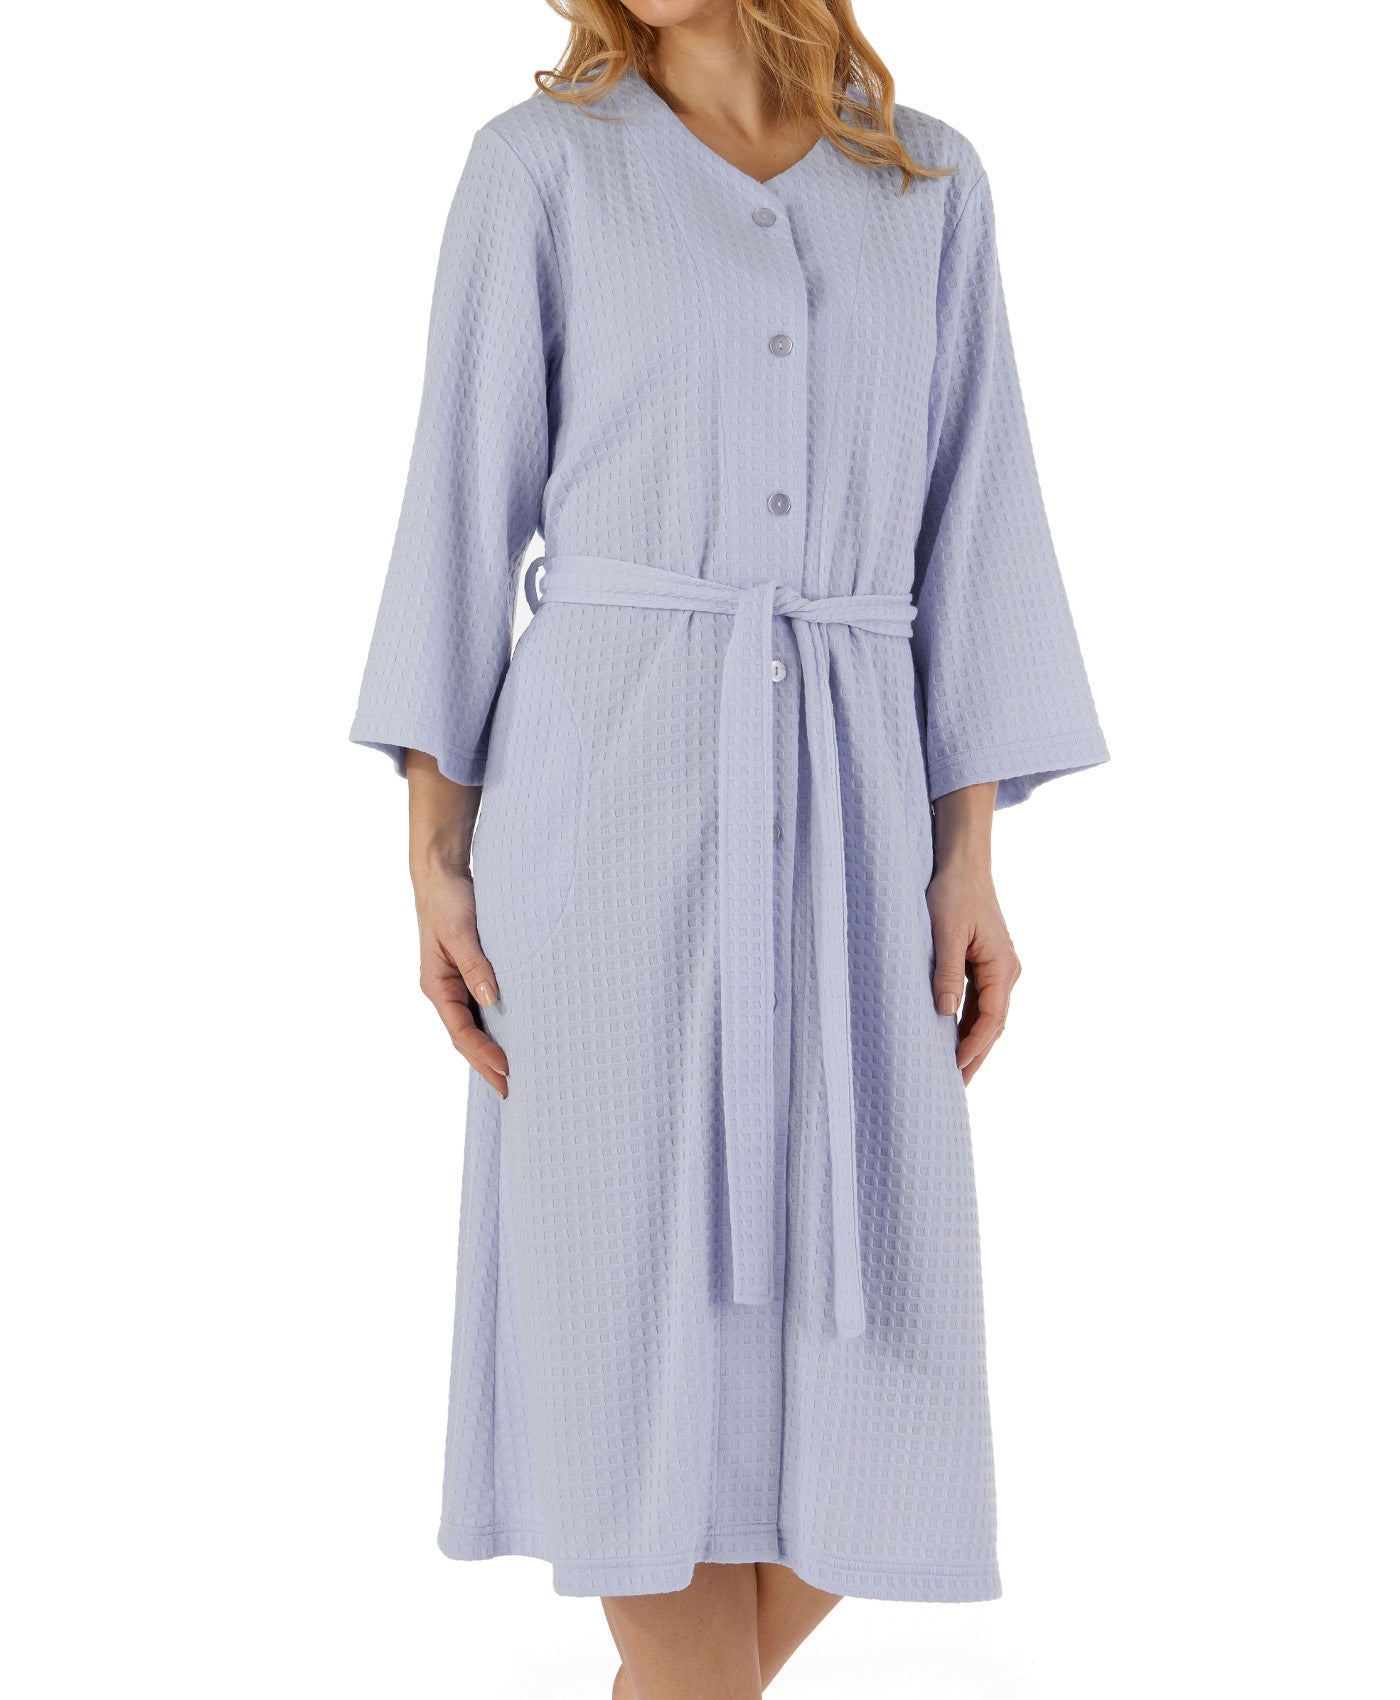 Cottonreal 100% Cotton White Shadow Stripe Button Up Dressing Gown Robe |  eBay